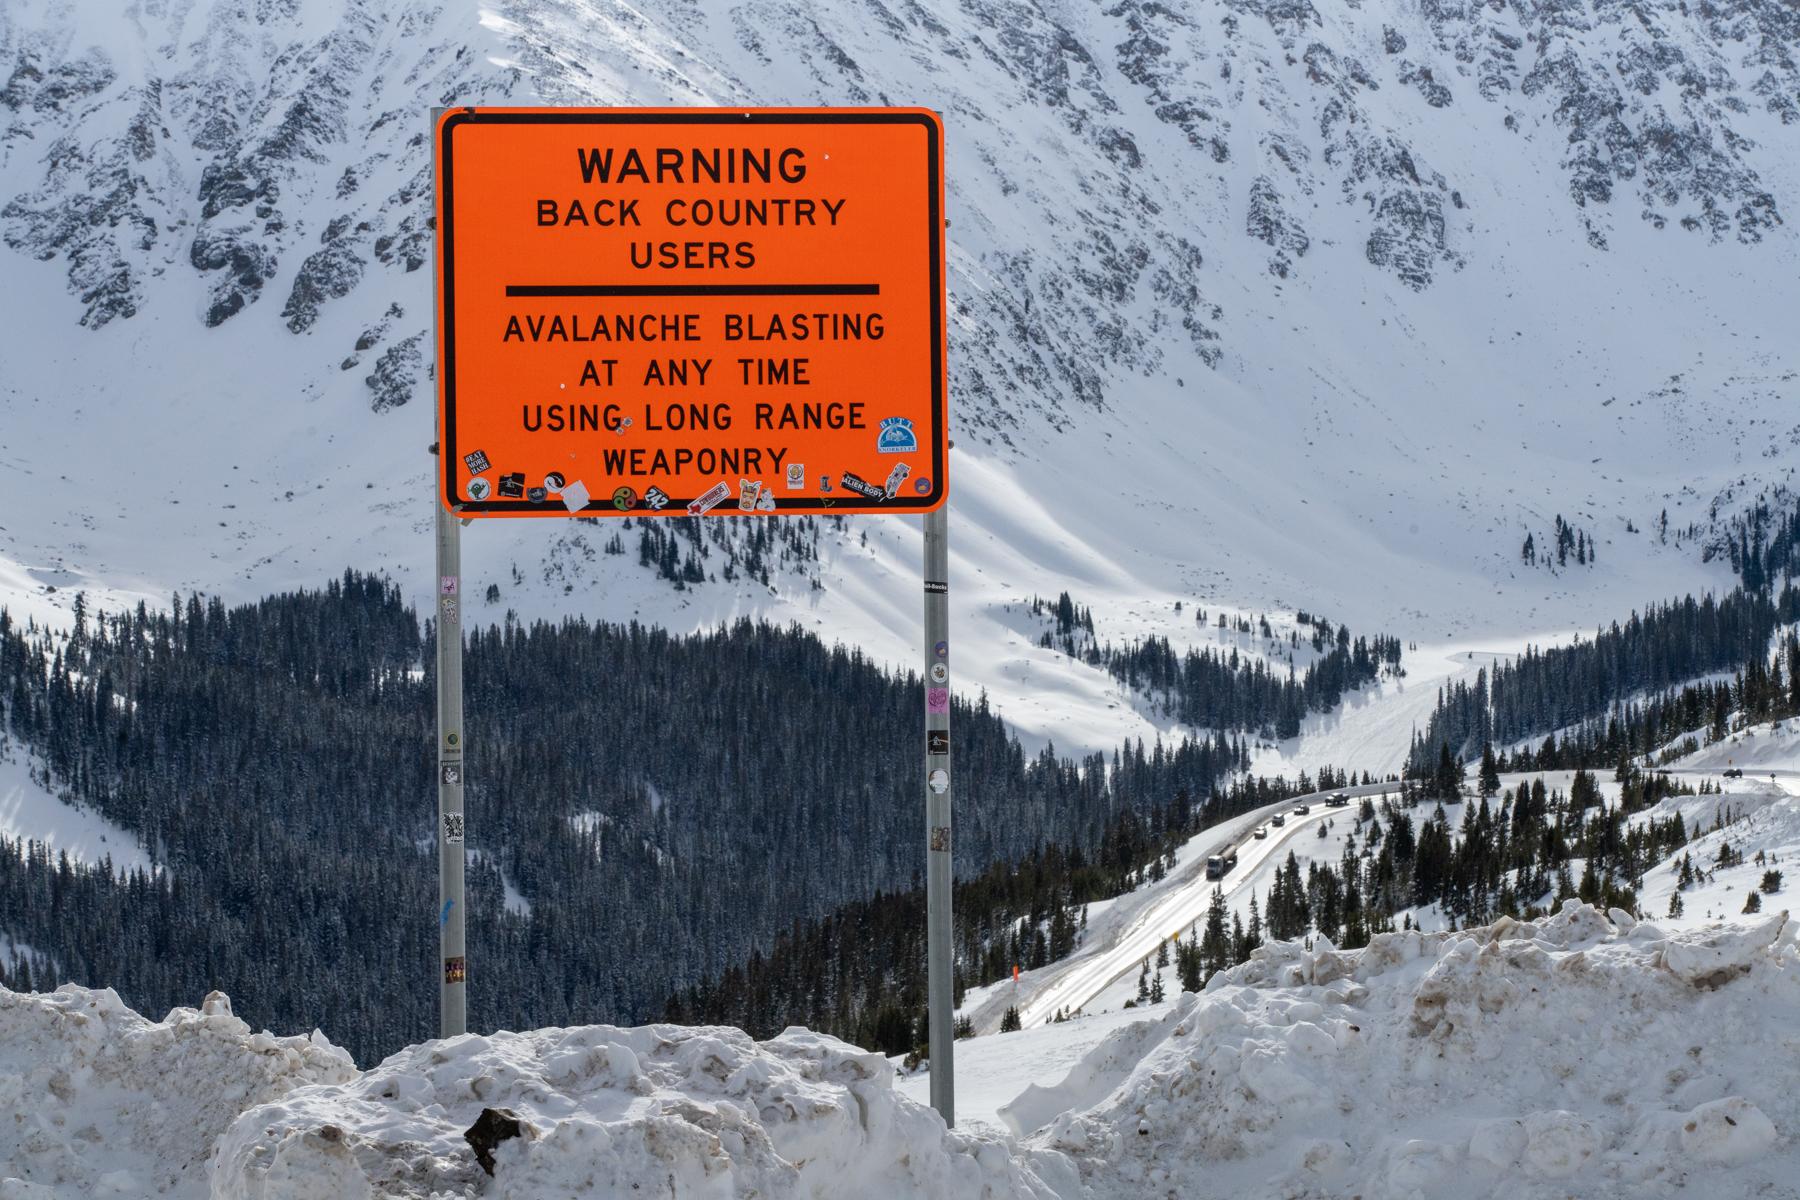 20230113-AVALANCHE-AREA-WARNING-SIGNS-LOVELAND-PASS